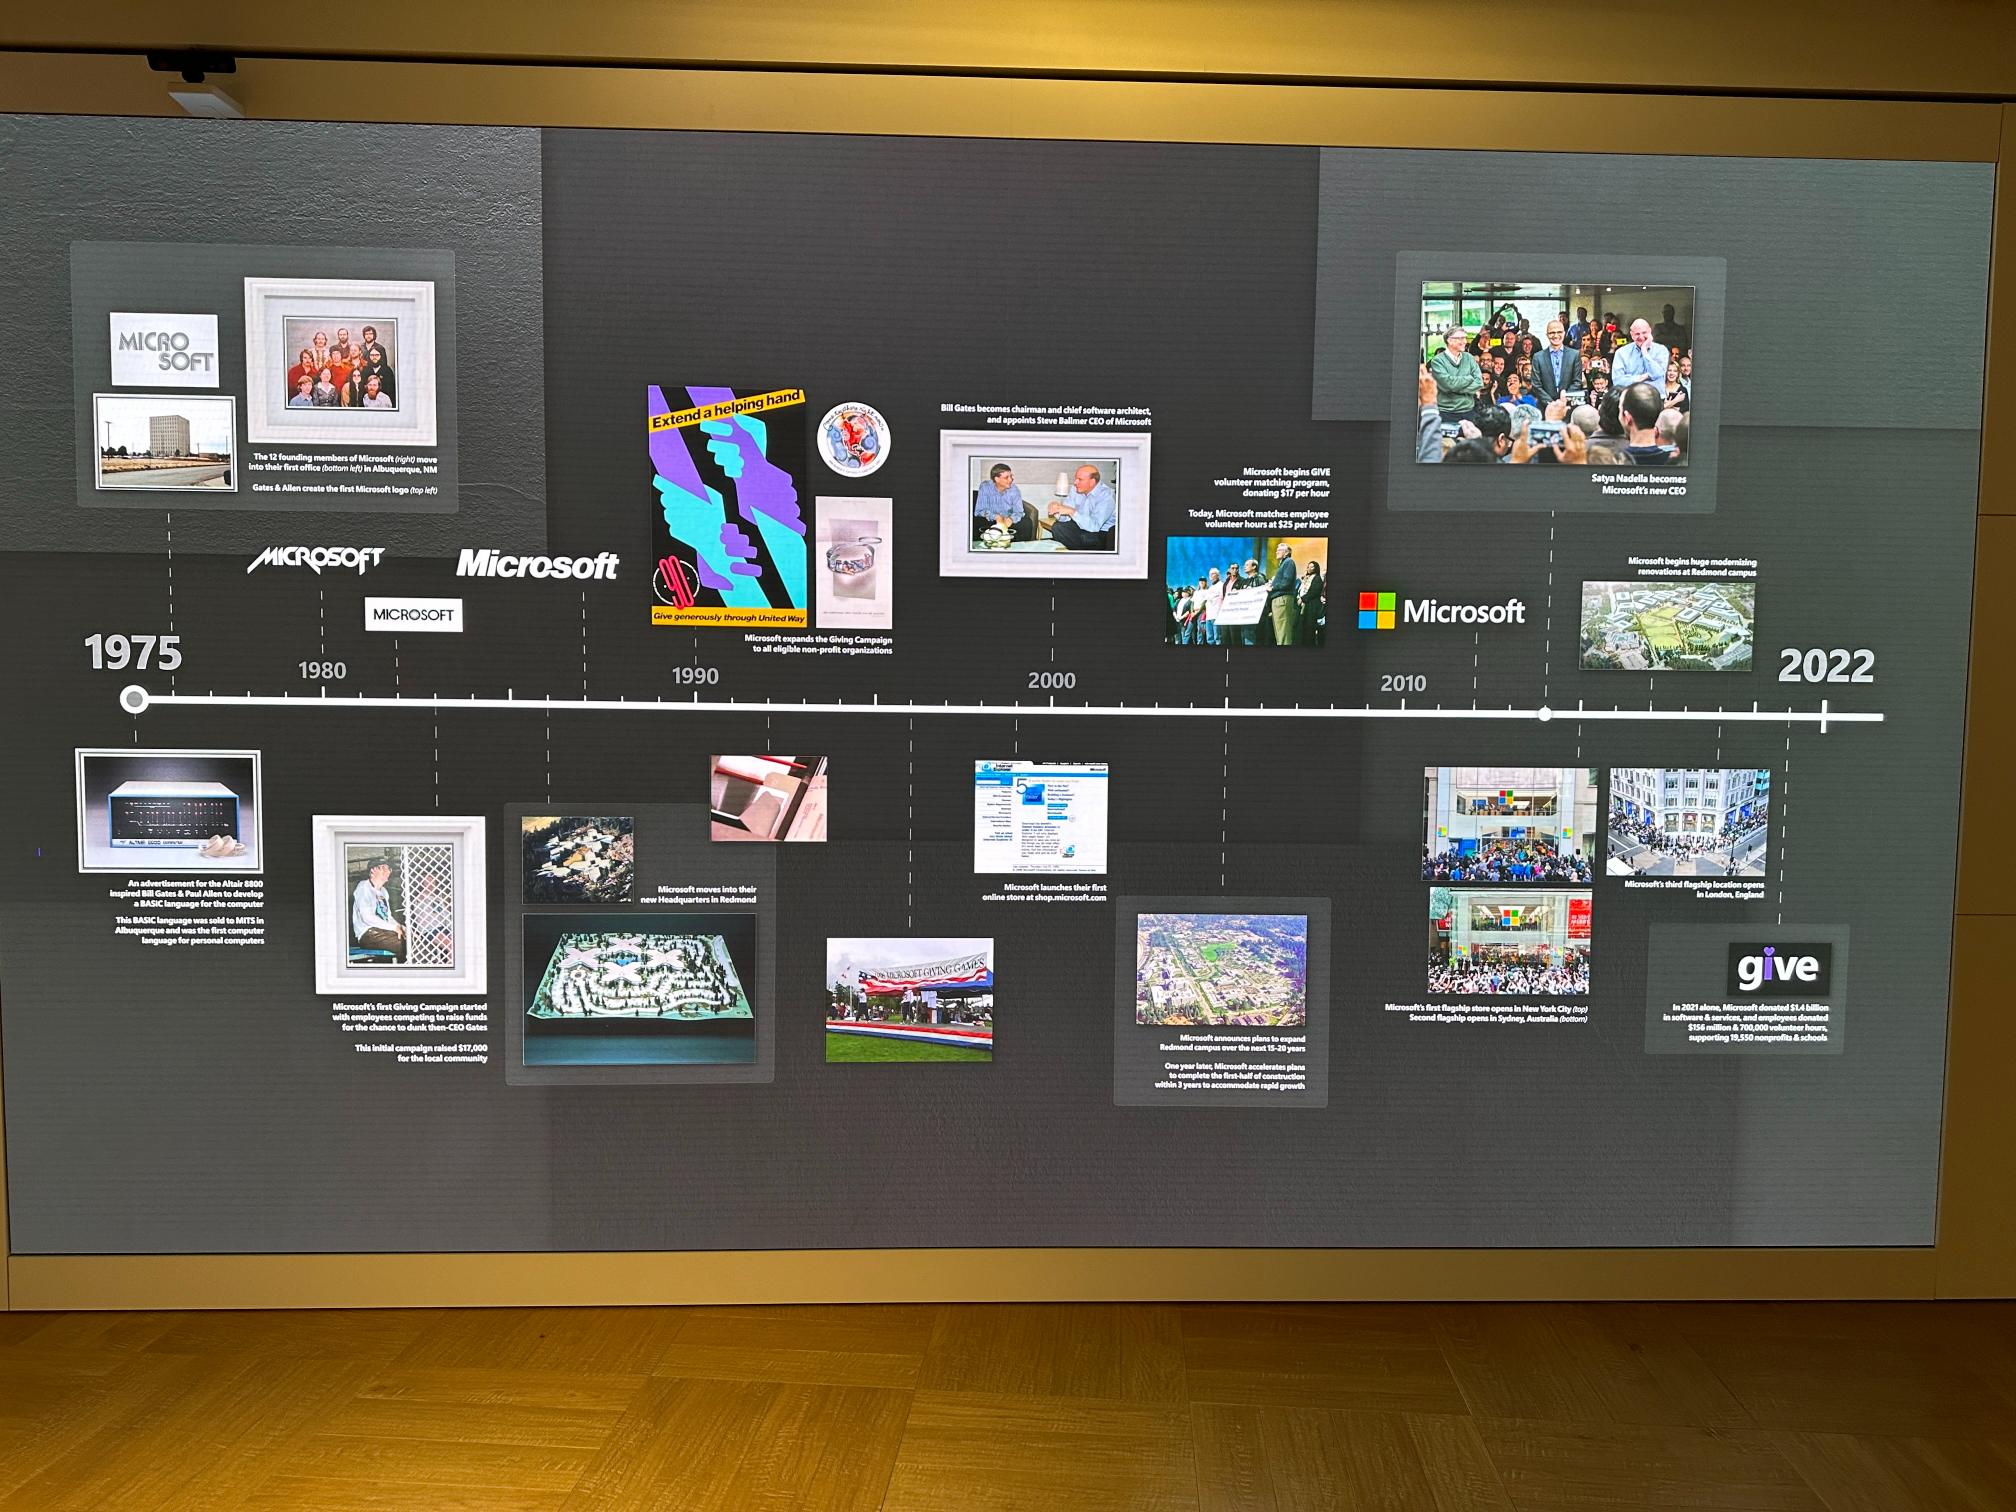 Microsoft timeline spanning from 1975 to 2022.